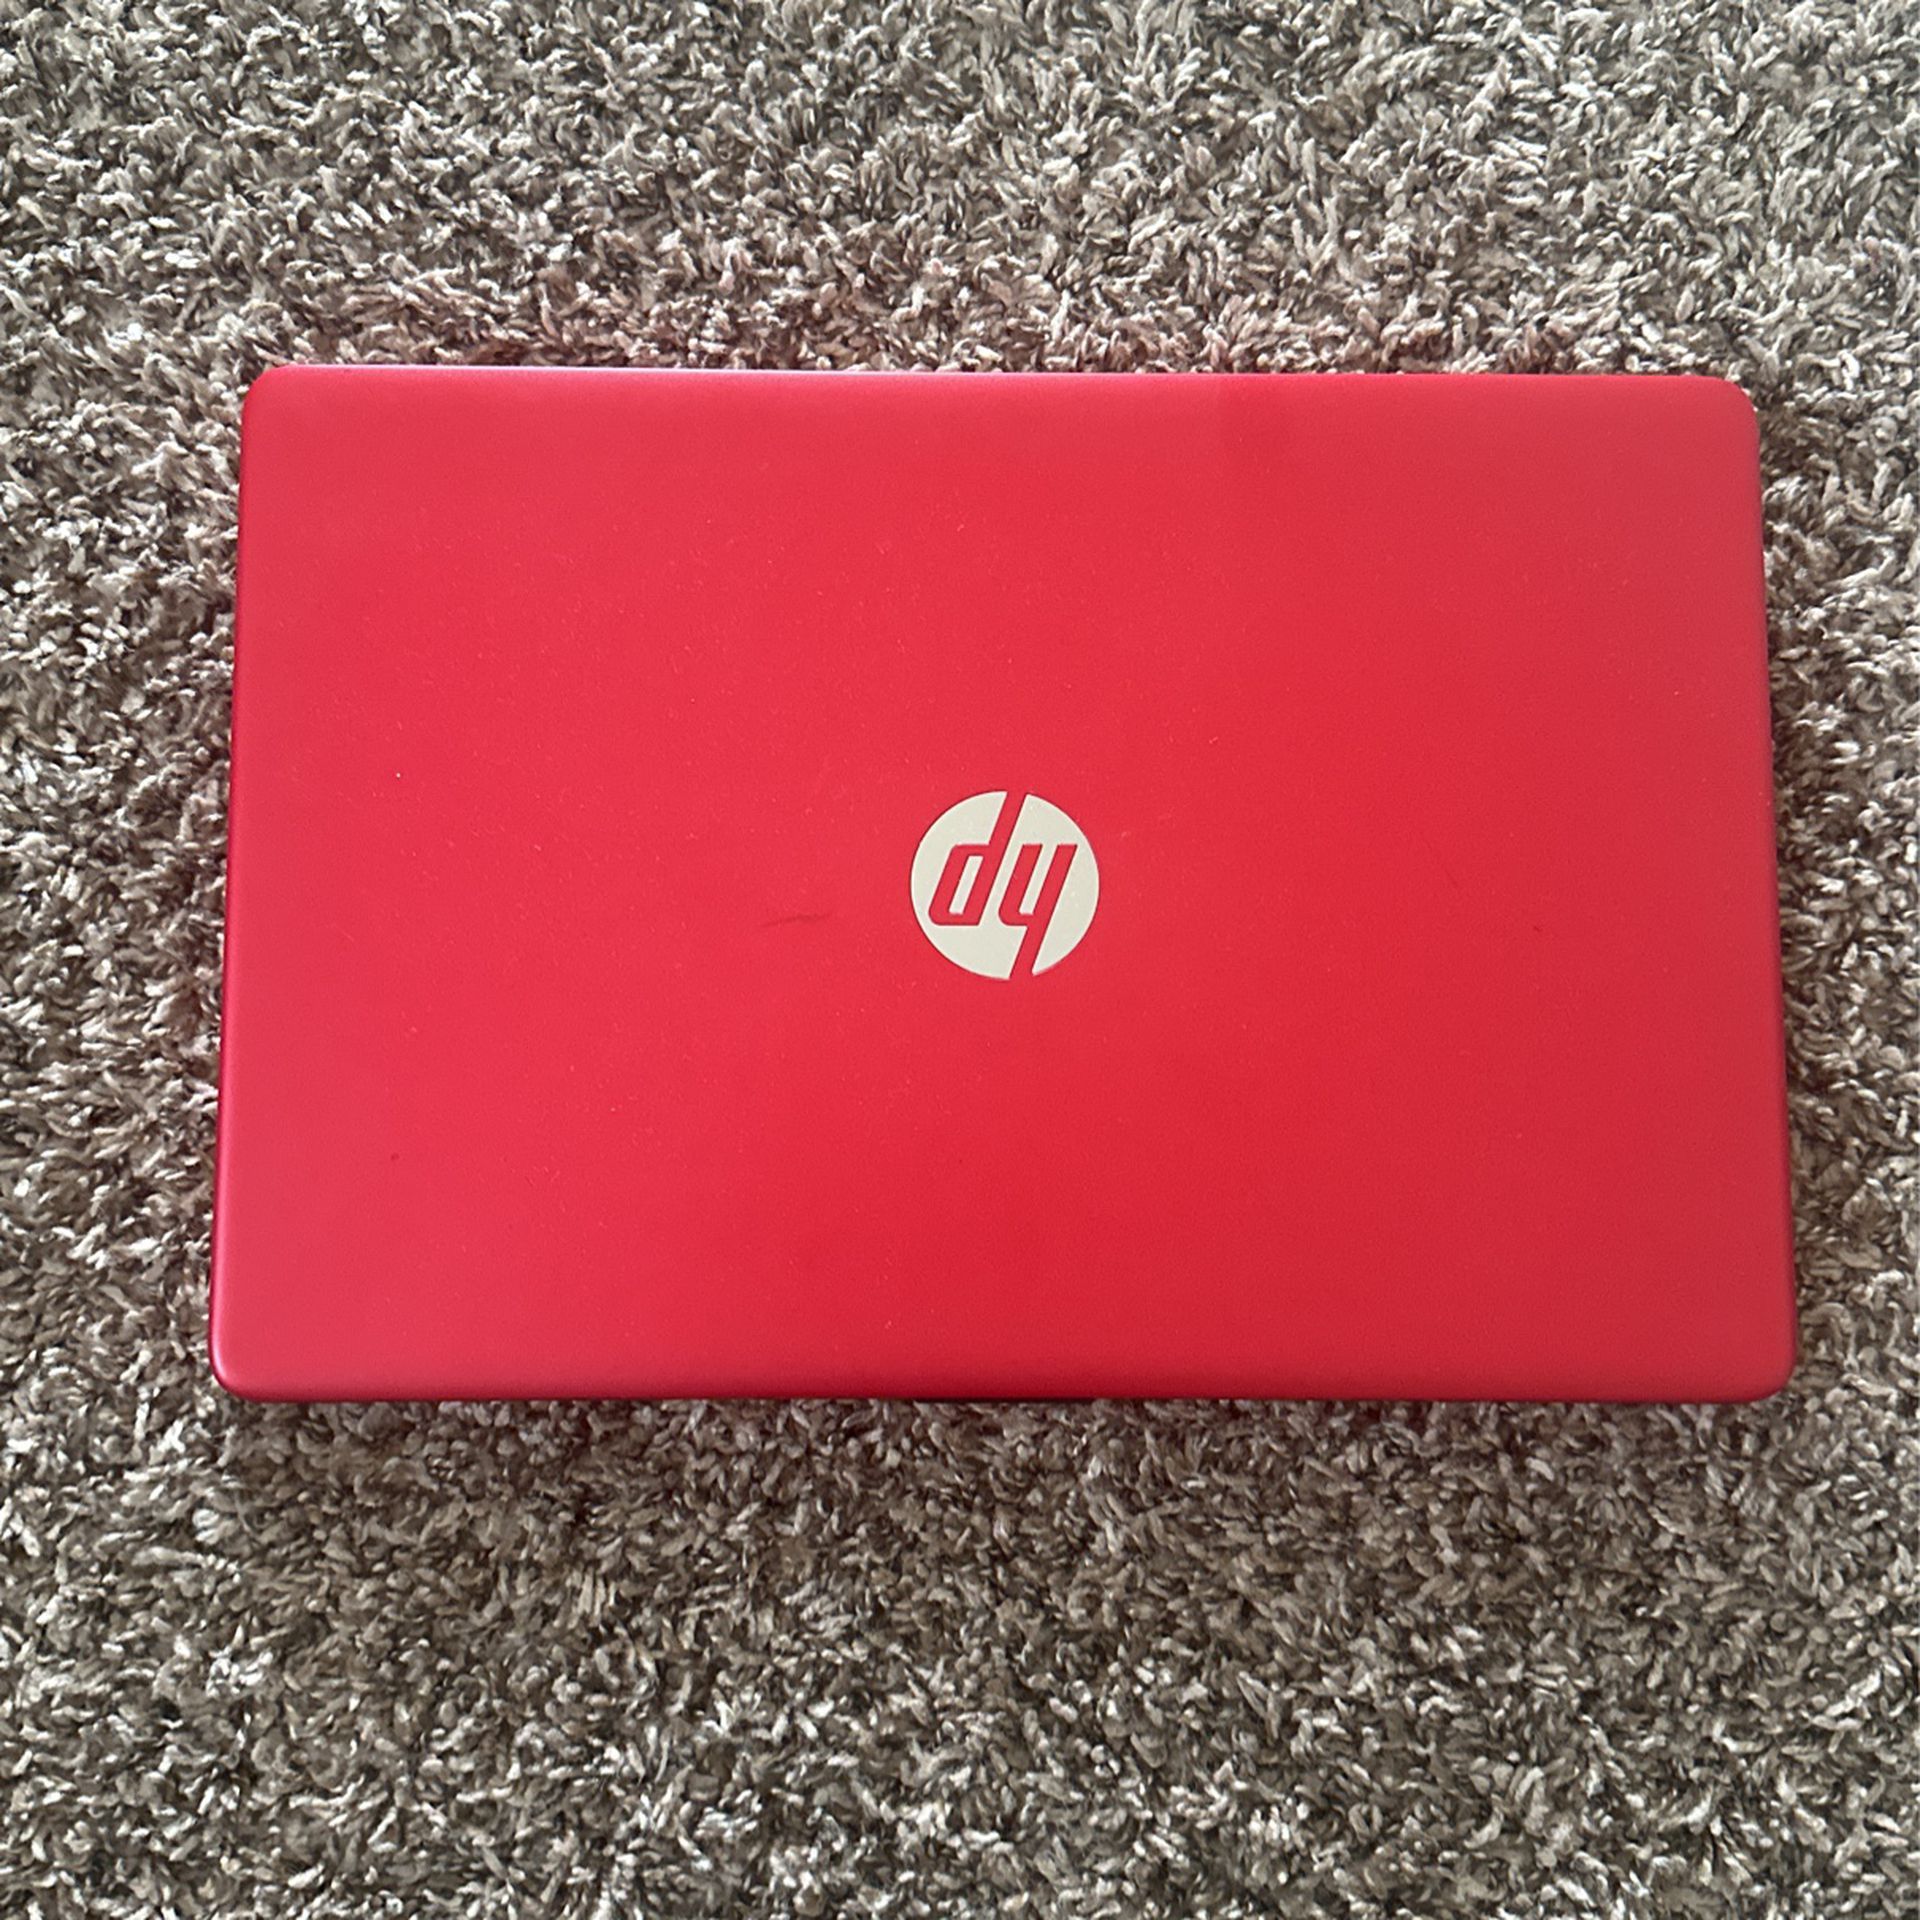 Hp Laptop 15.6 32gb ram with Charger